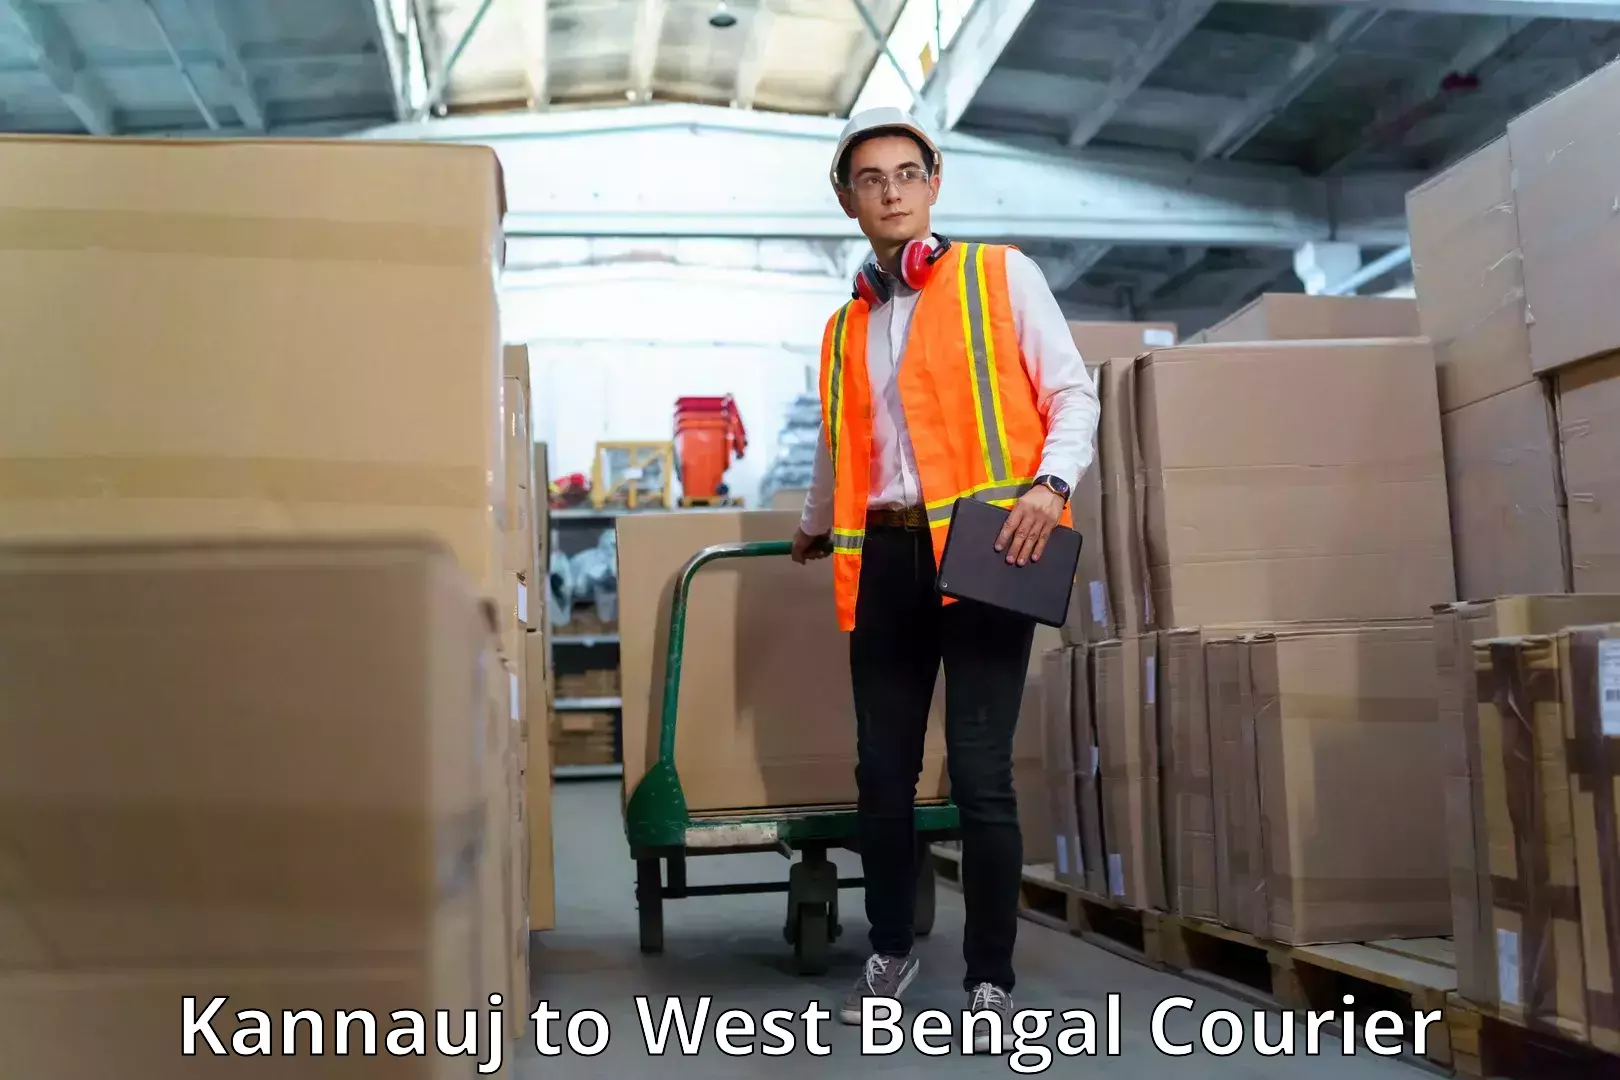 Cash on delivery service Kannauj to West Bengal